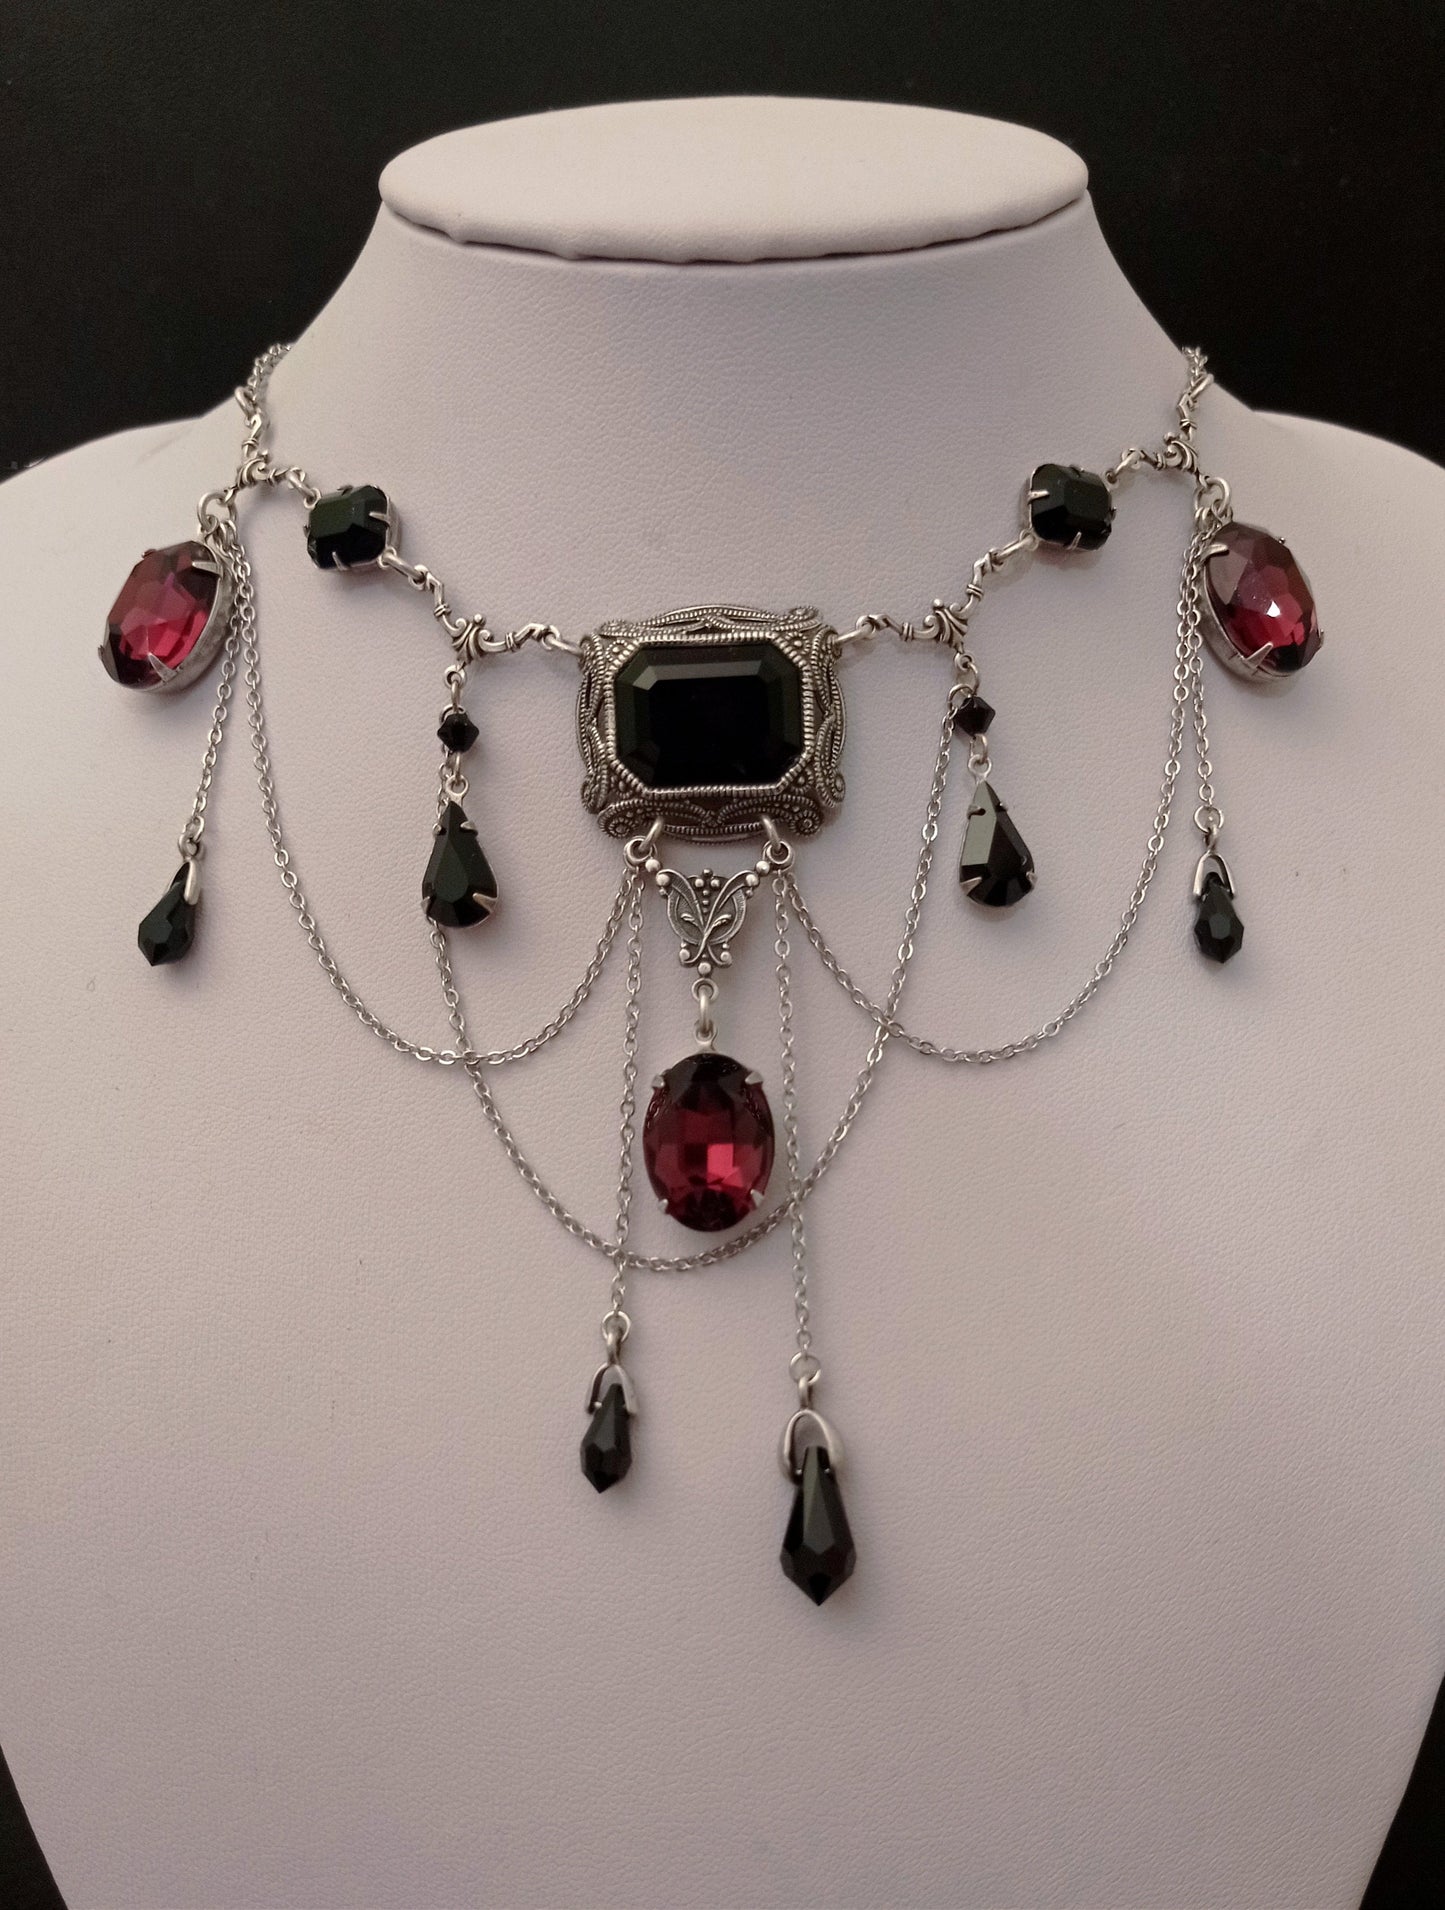 Gothic Necklace with Black and Purple Swarovski Crystals – Aranwen's ...